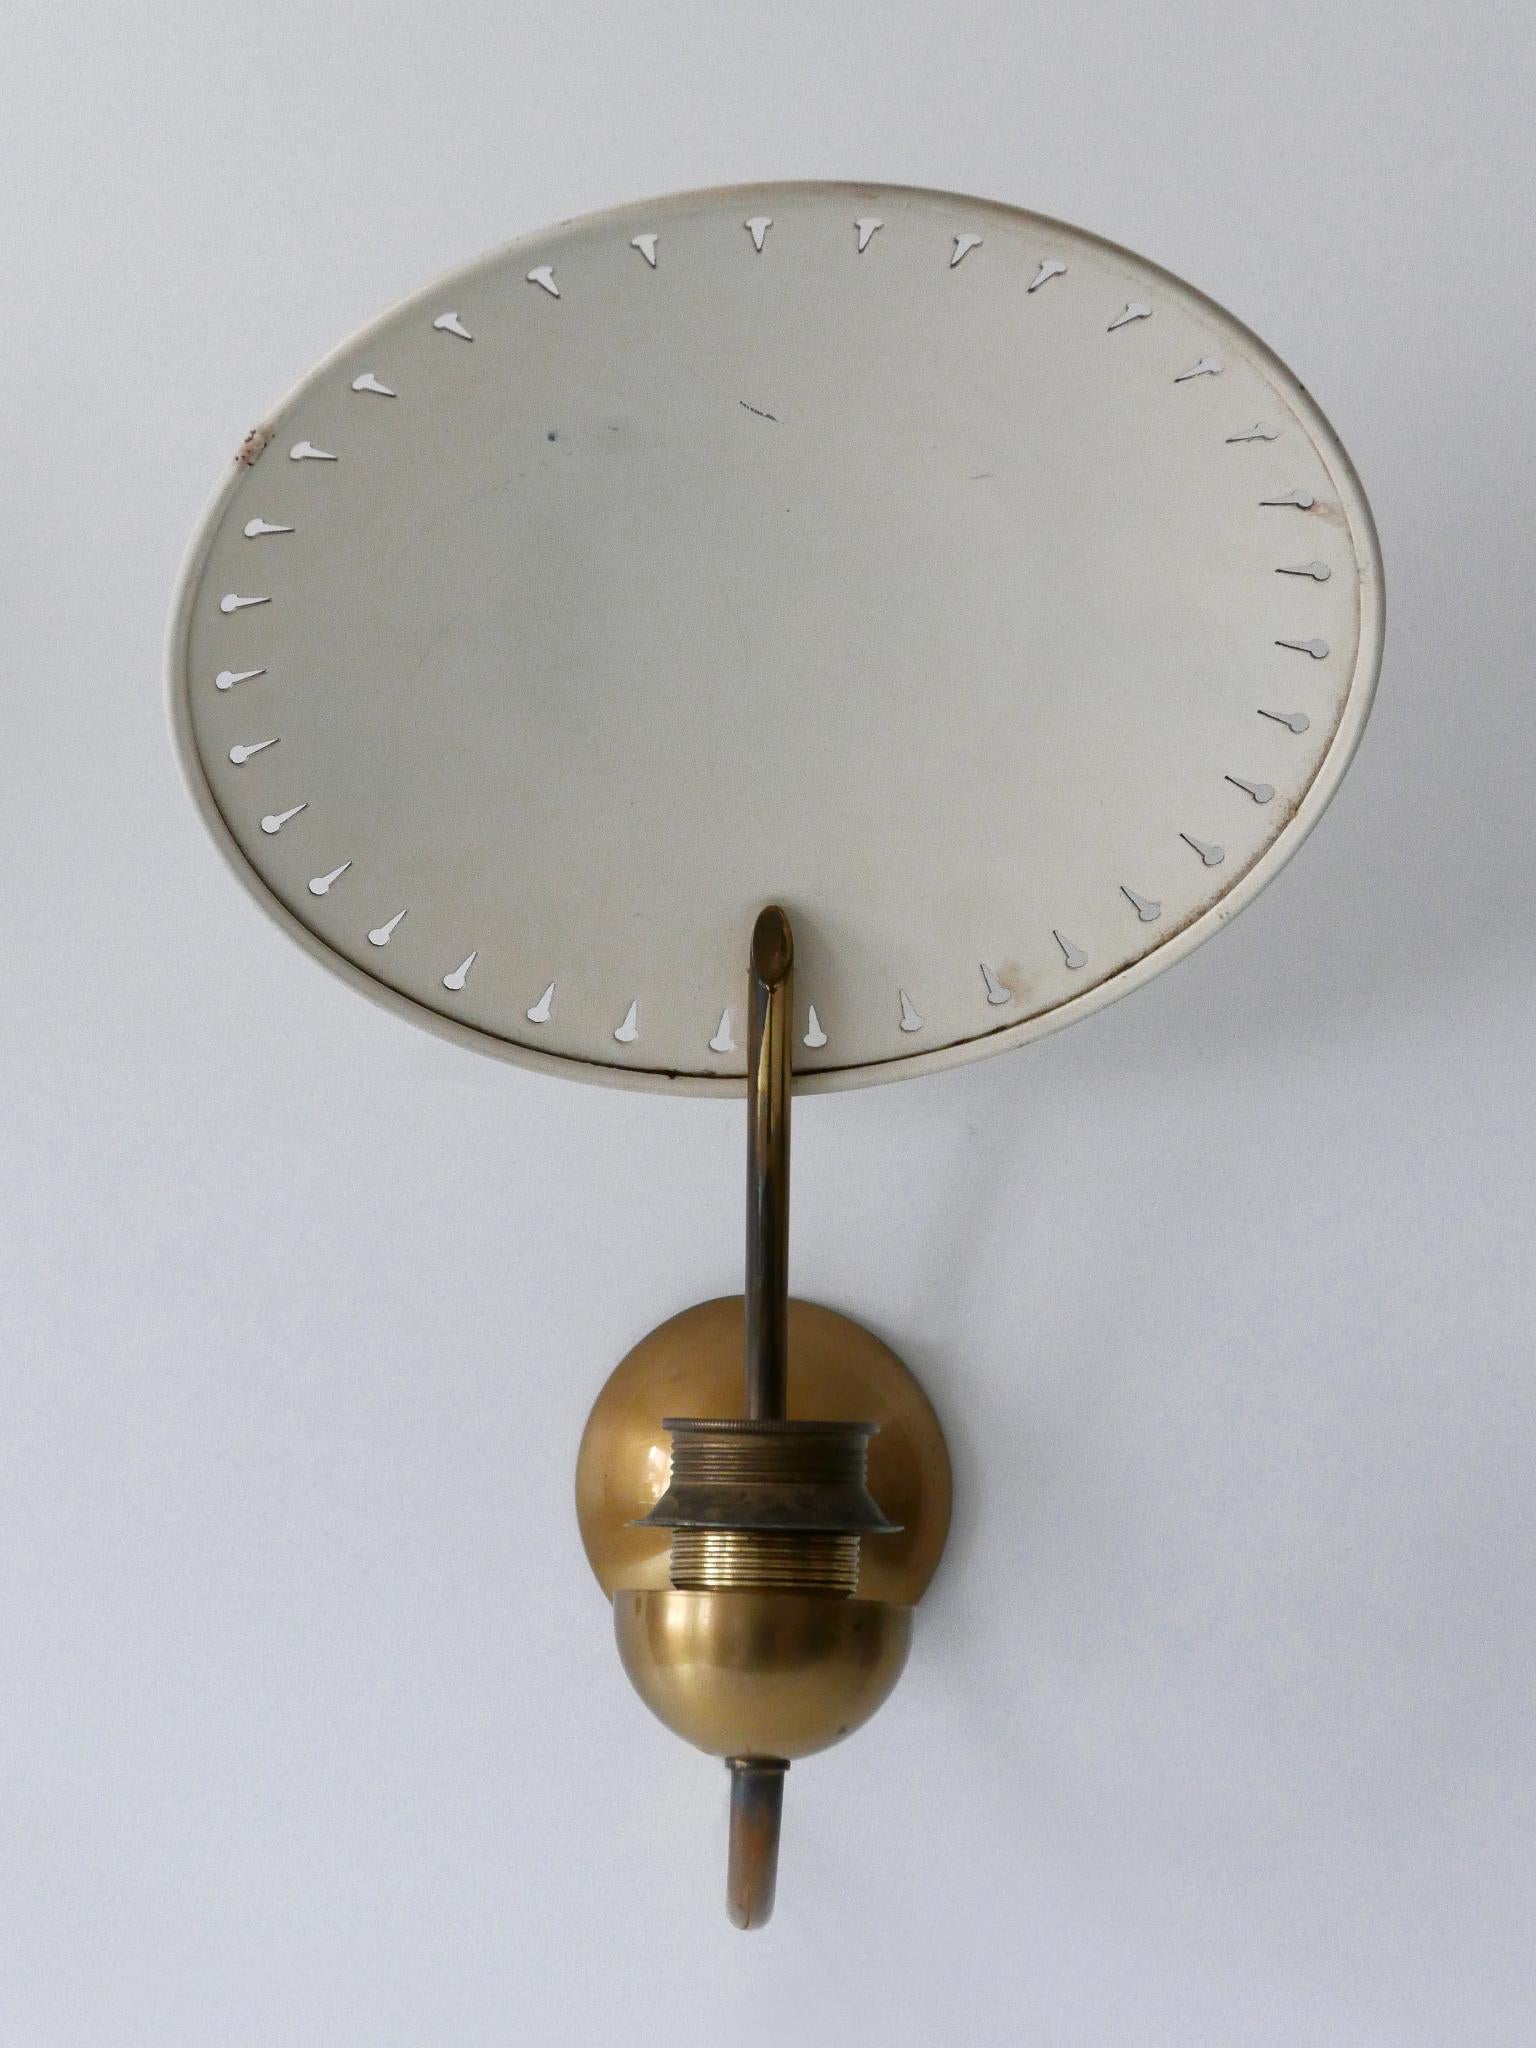 Set of Two Rare Mid-Century Modern Sputnik Sconces or Wall Lights Germany 1950s For Sale 10